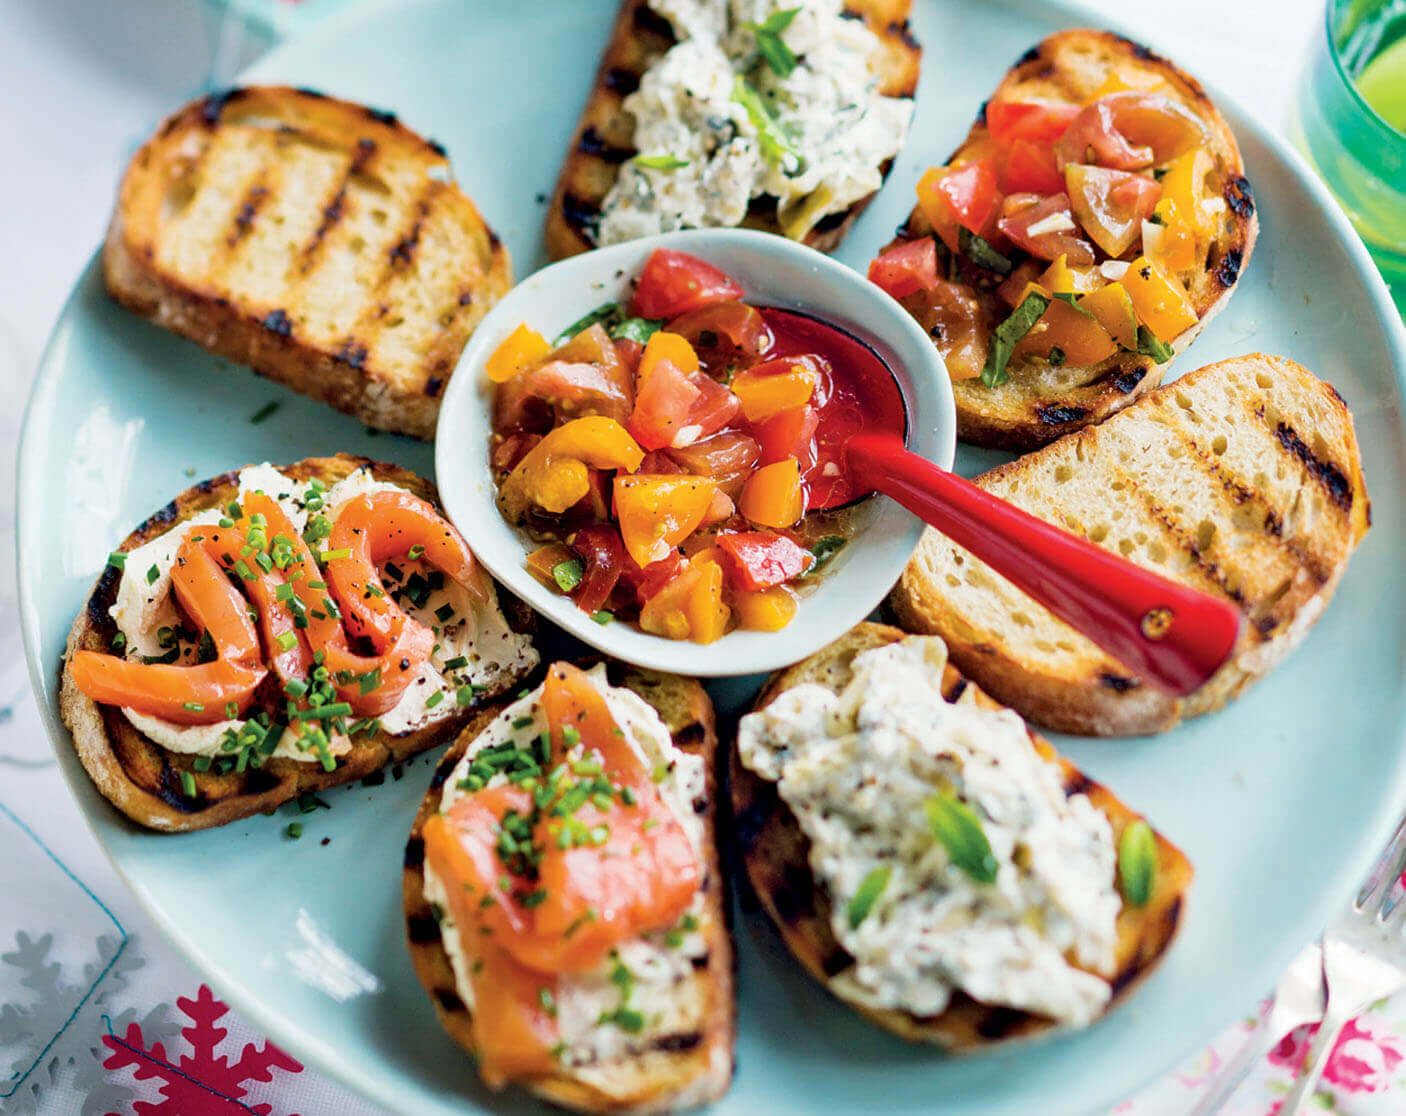 🥘 What’s Your Personality Type? Make a Dinner to Find Out Bruschetta platter